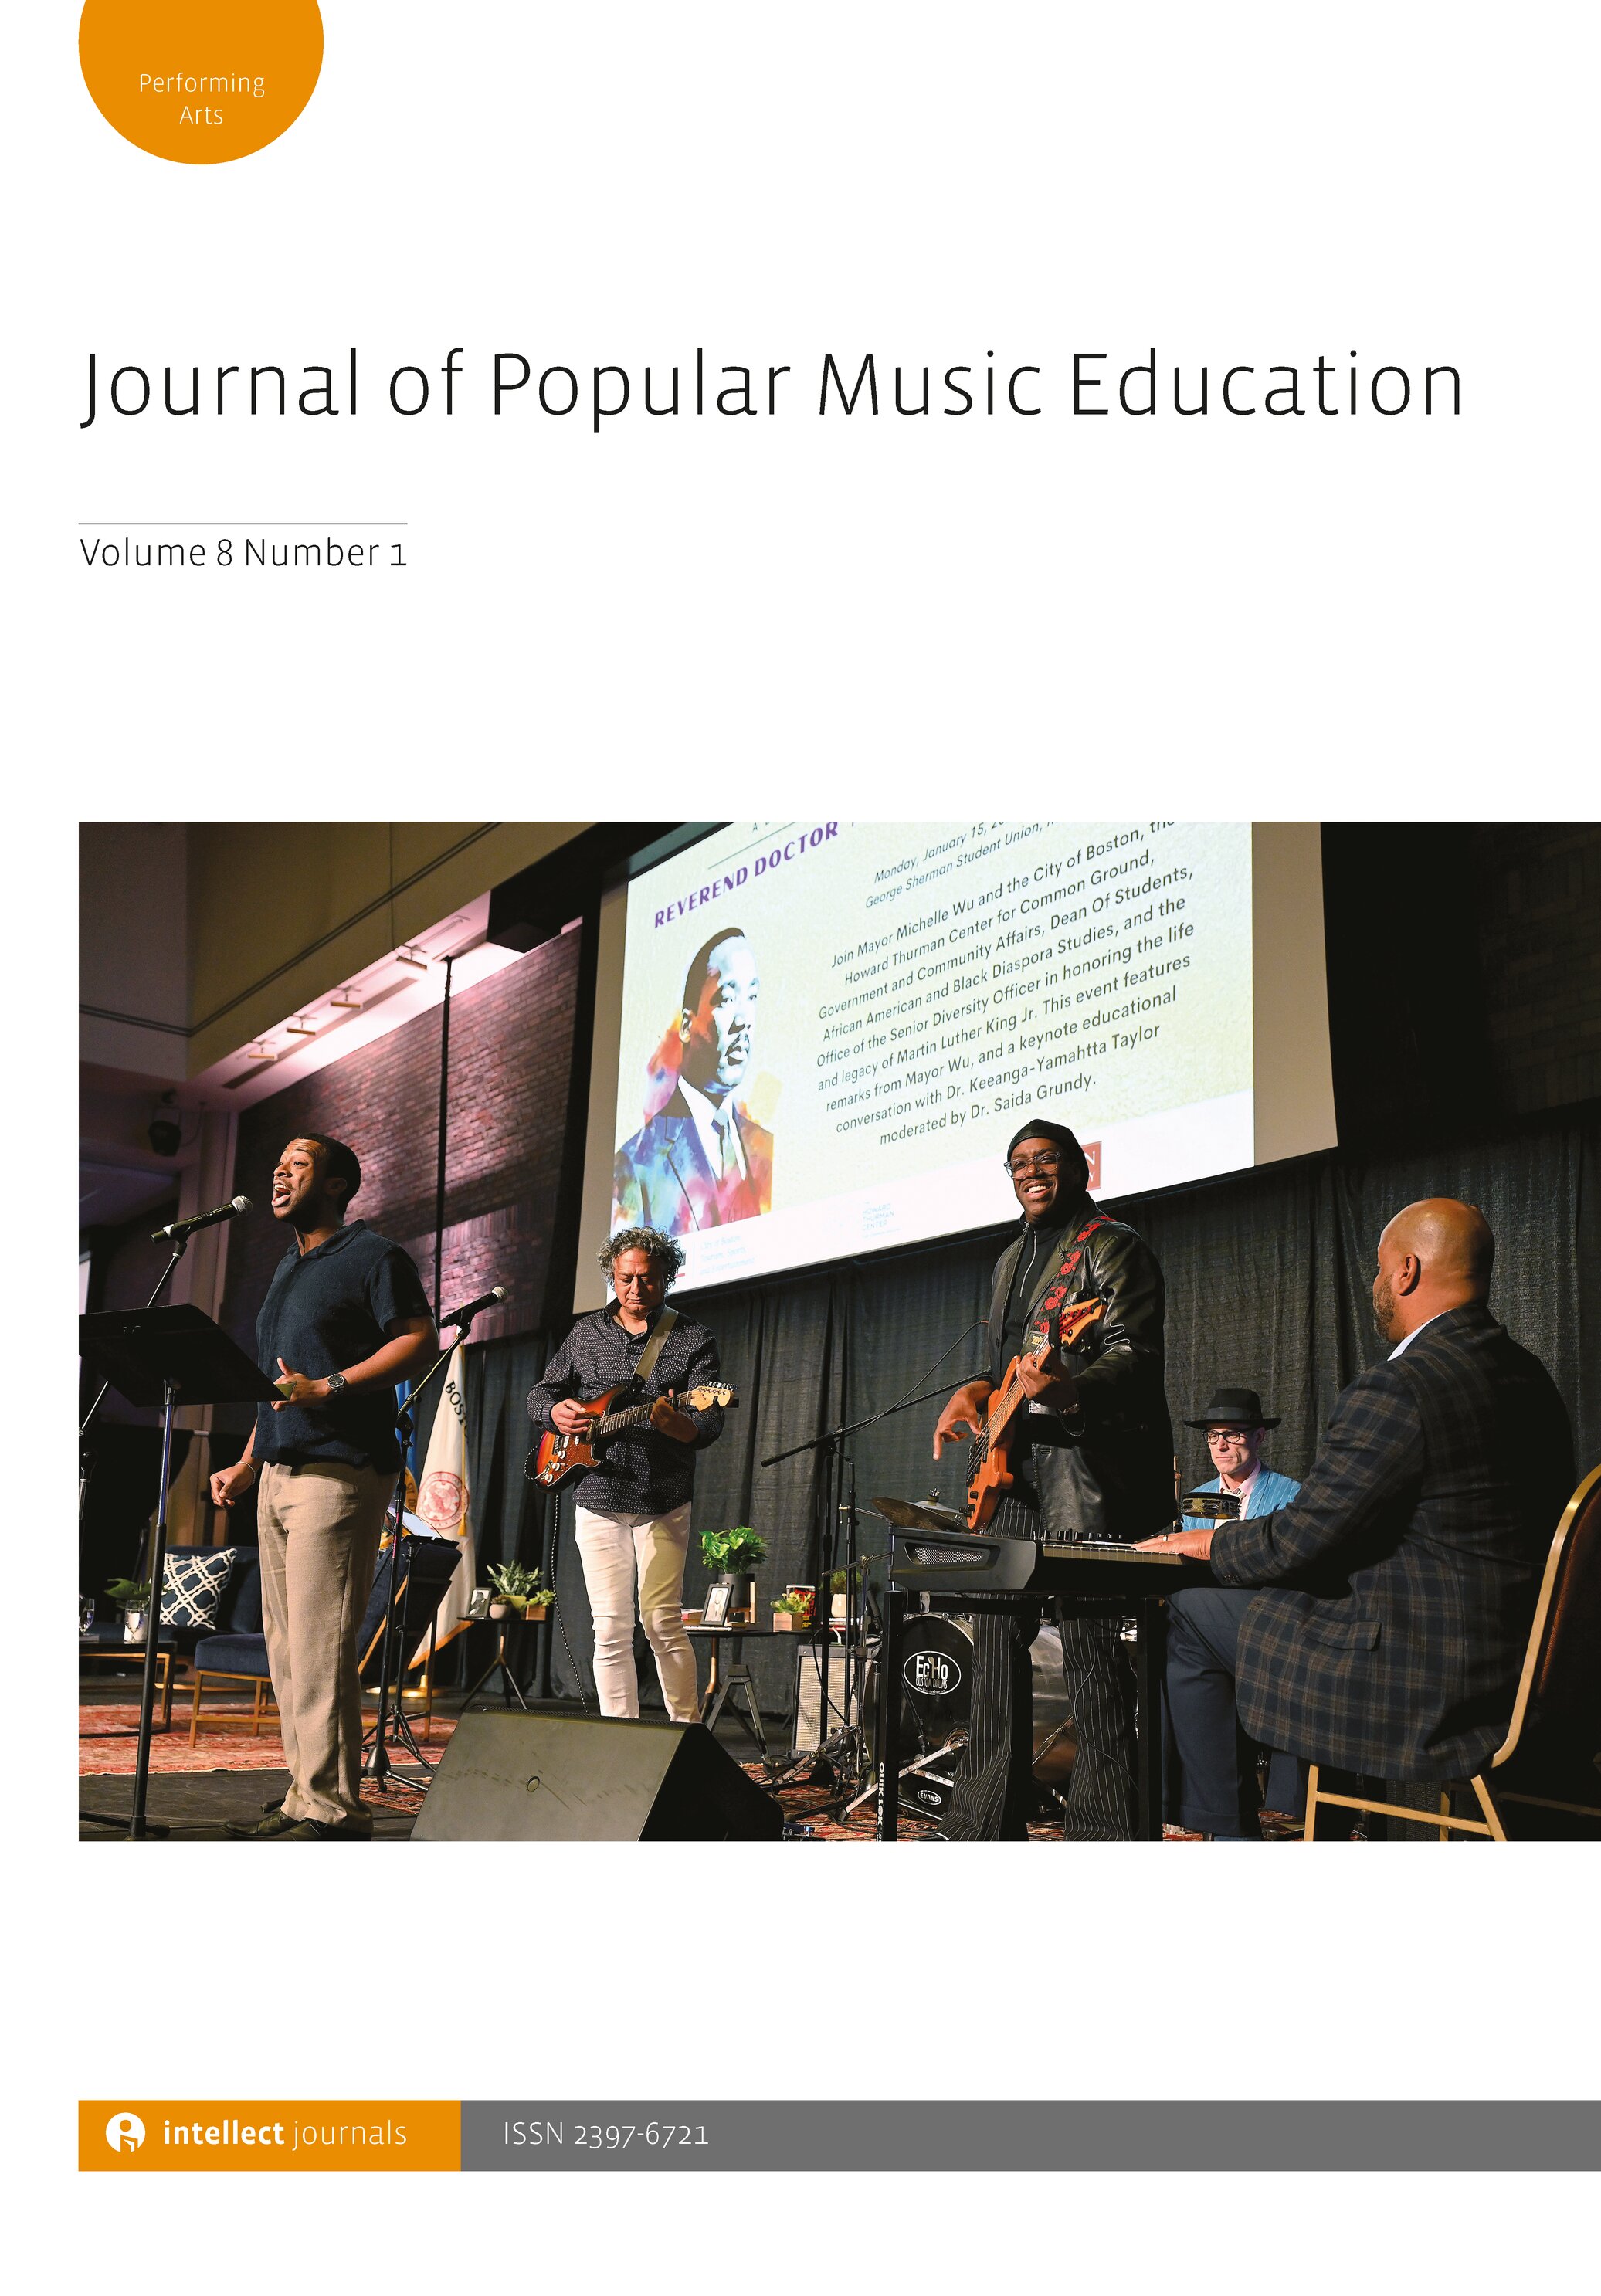 Journal of Popular Music Education 8.1 is out now!